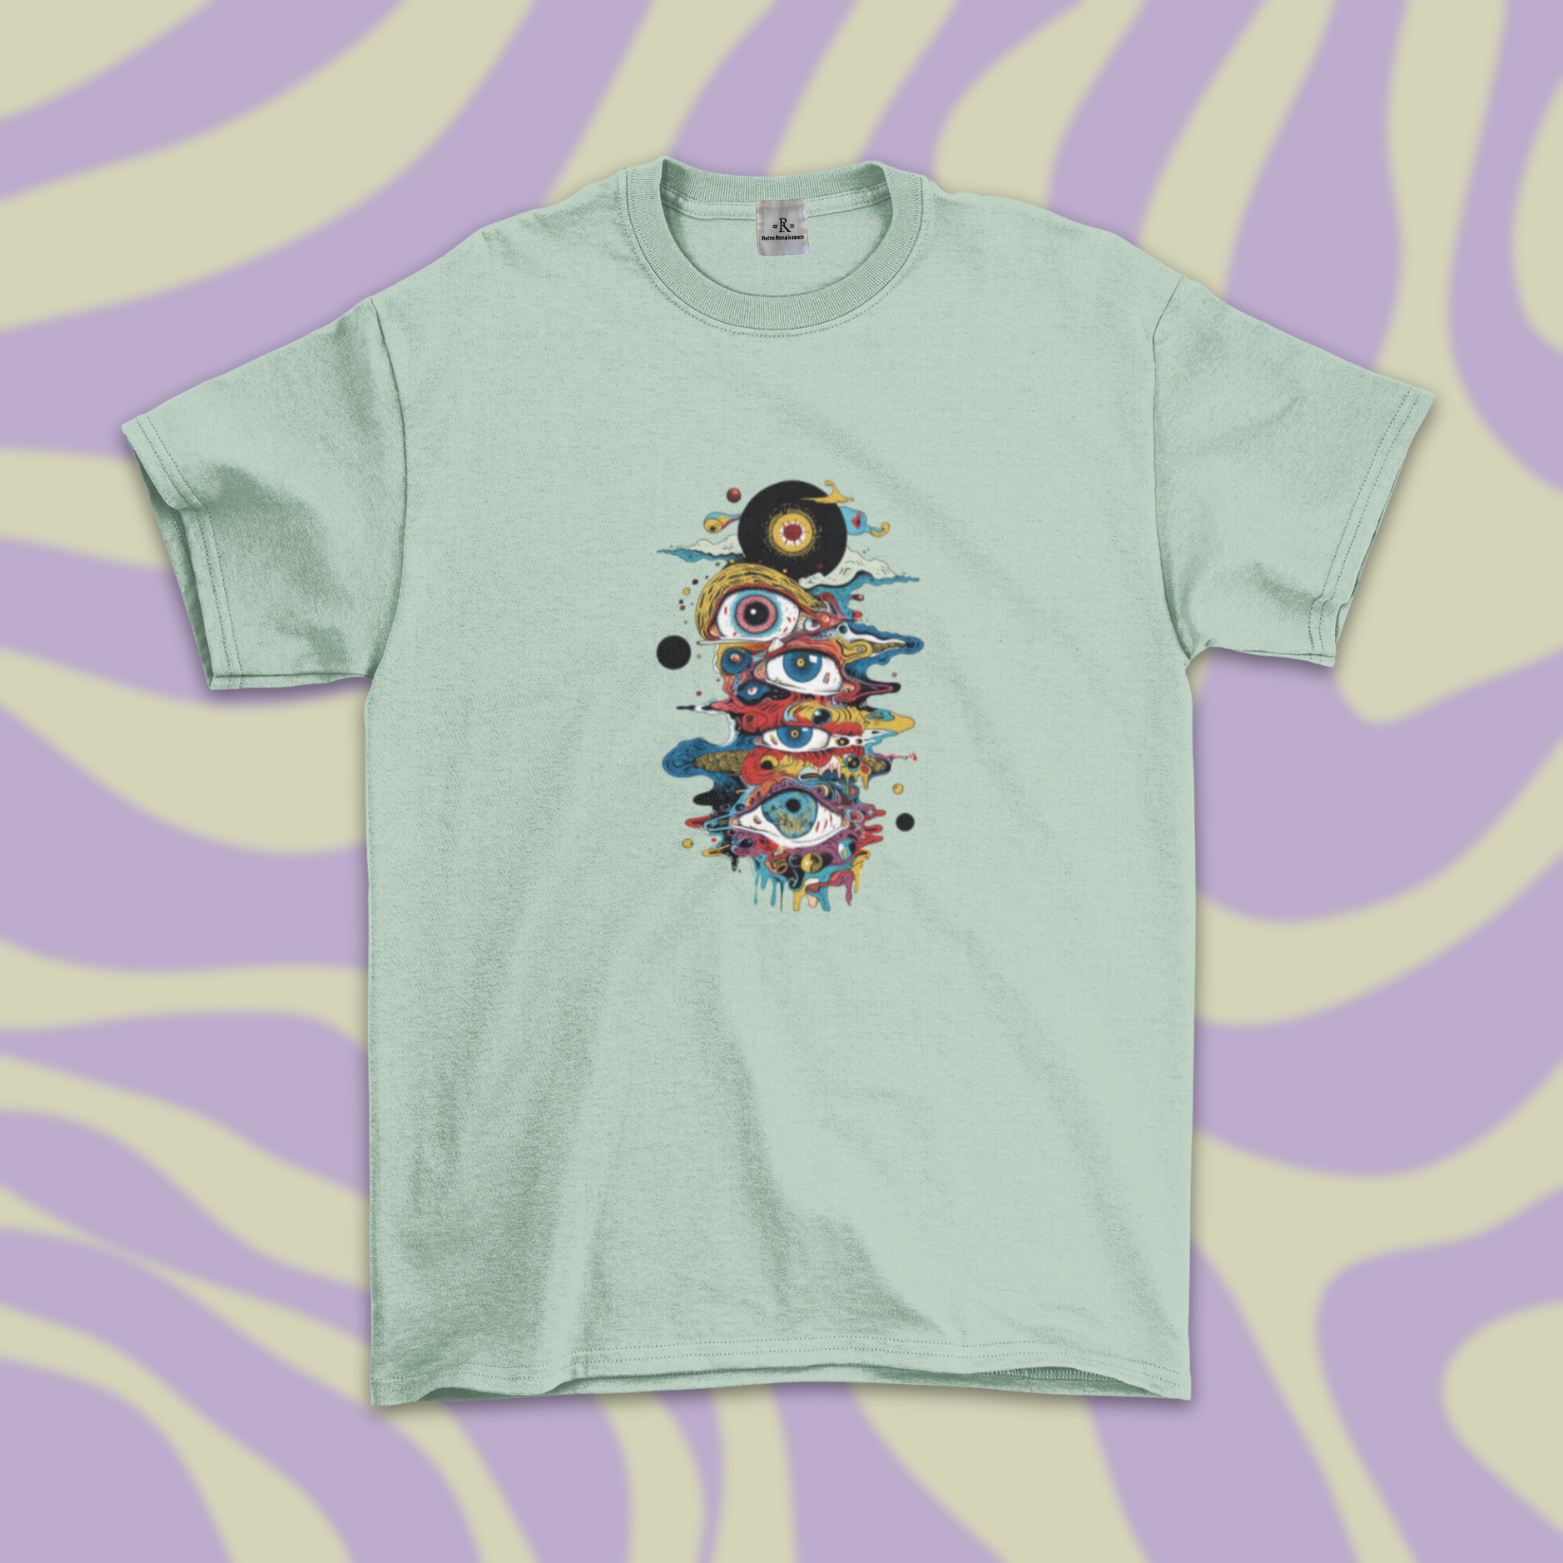 Psychedelic Inspired Tee, a Pile of Eyes